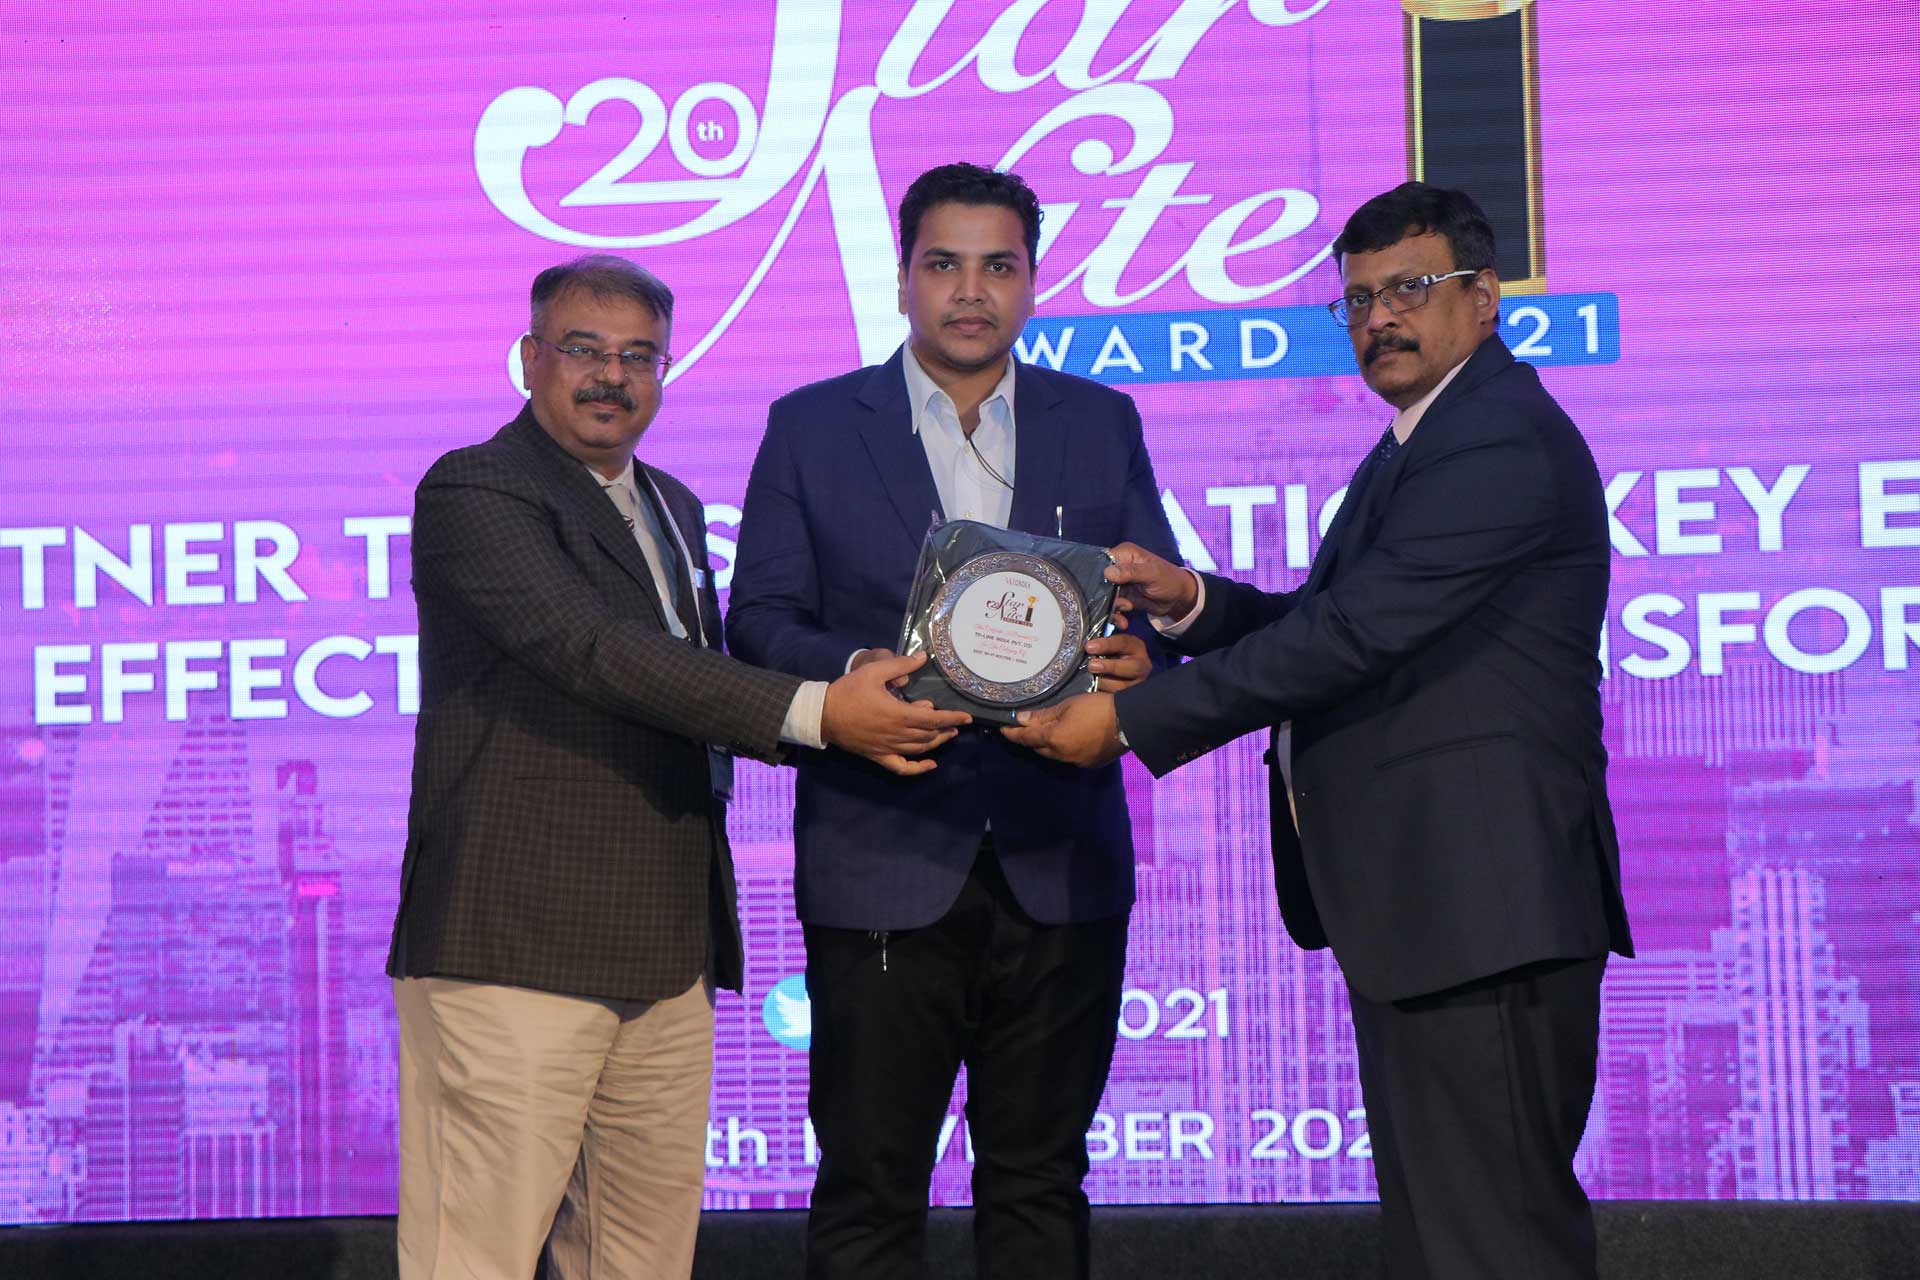 Best Wi-Fi Router - Soho Award goes to TP-LINK India Pvt Ltd at 20th Star Nite Awards 2021